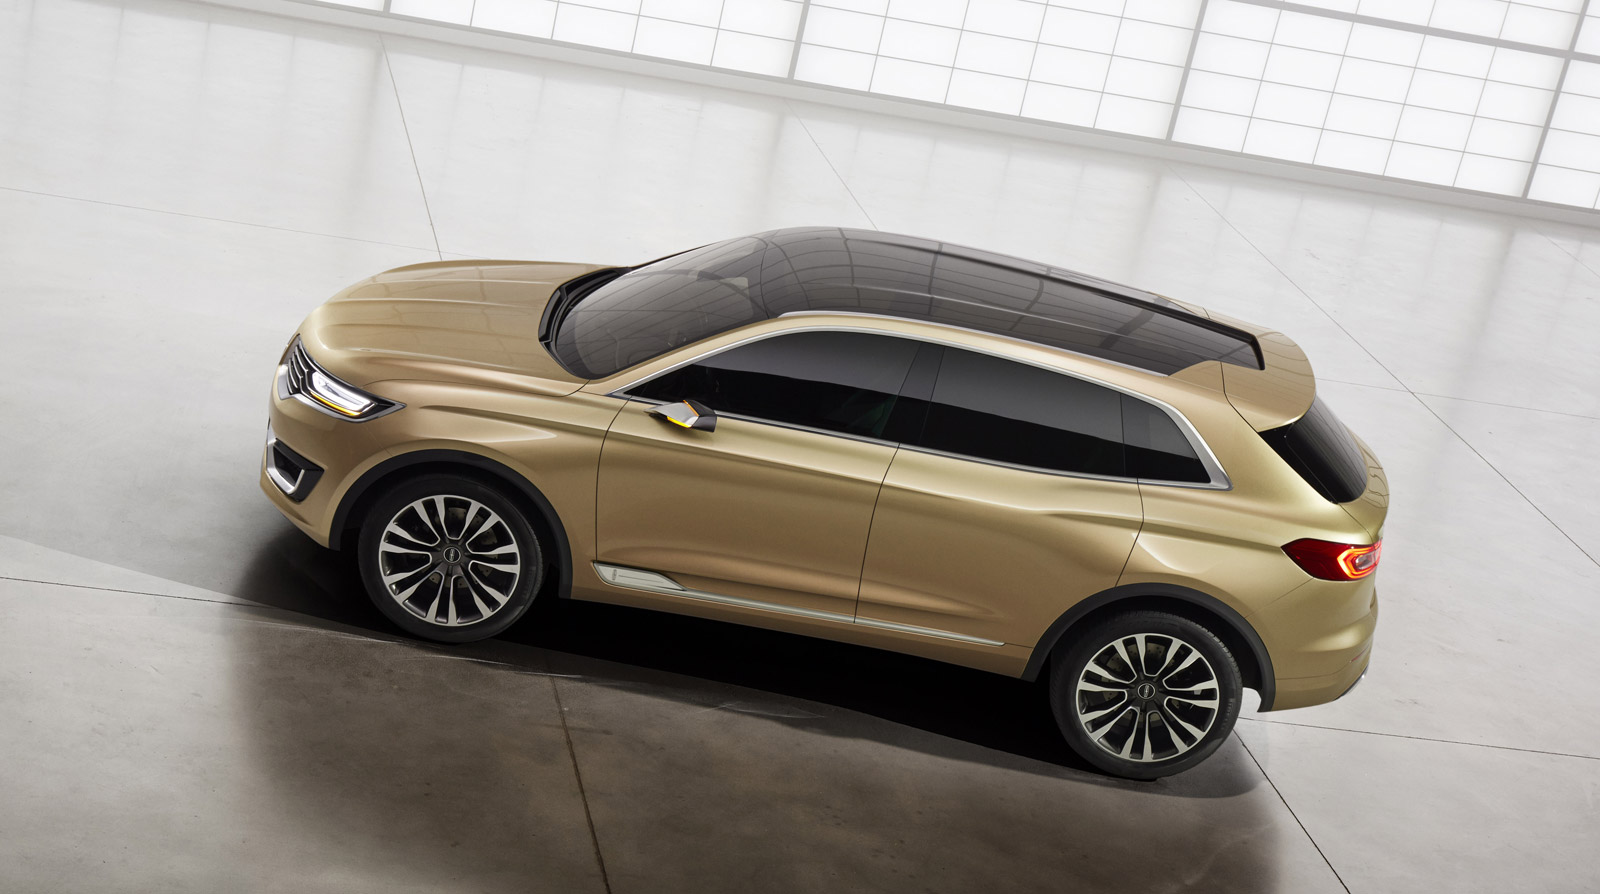 2015 Nissan Murano, World Car Awards, Next-Gen Lincoln MKX: What’s New @ The Car ...